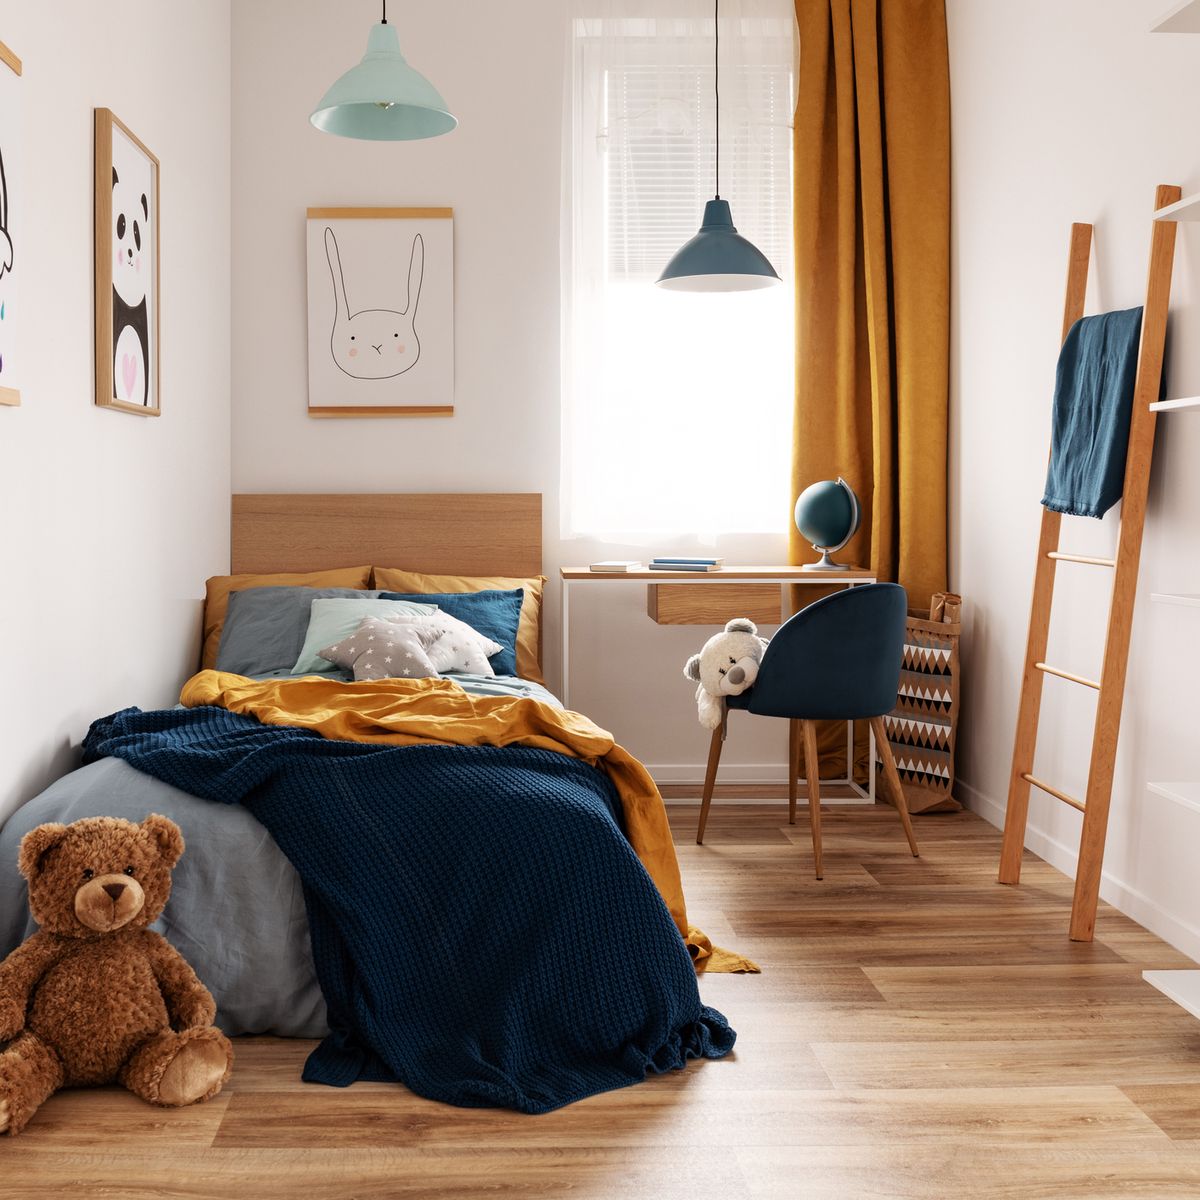 How to Design an Age-Appropriate Bedroom for Your Child